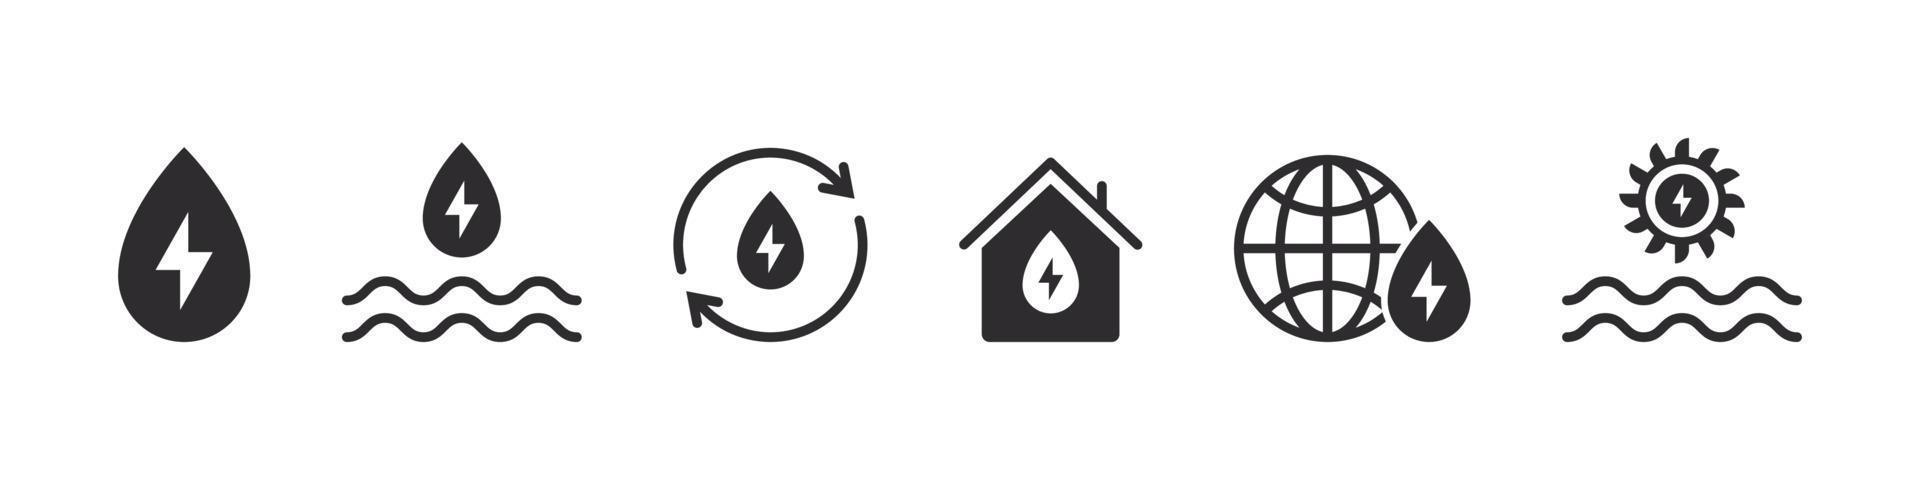 Water renewable energy icons. Ecology and Energy web icons. Water energy. Vector illustration